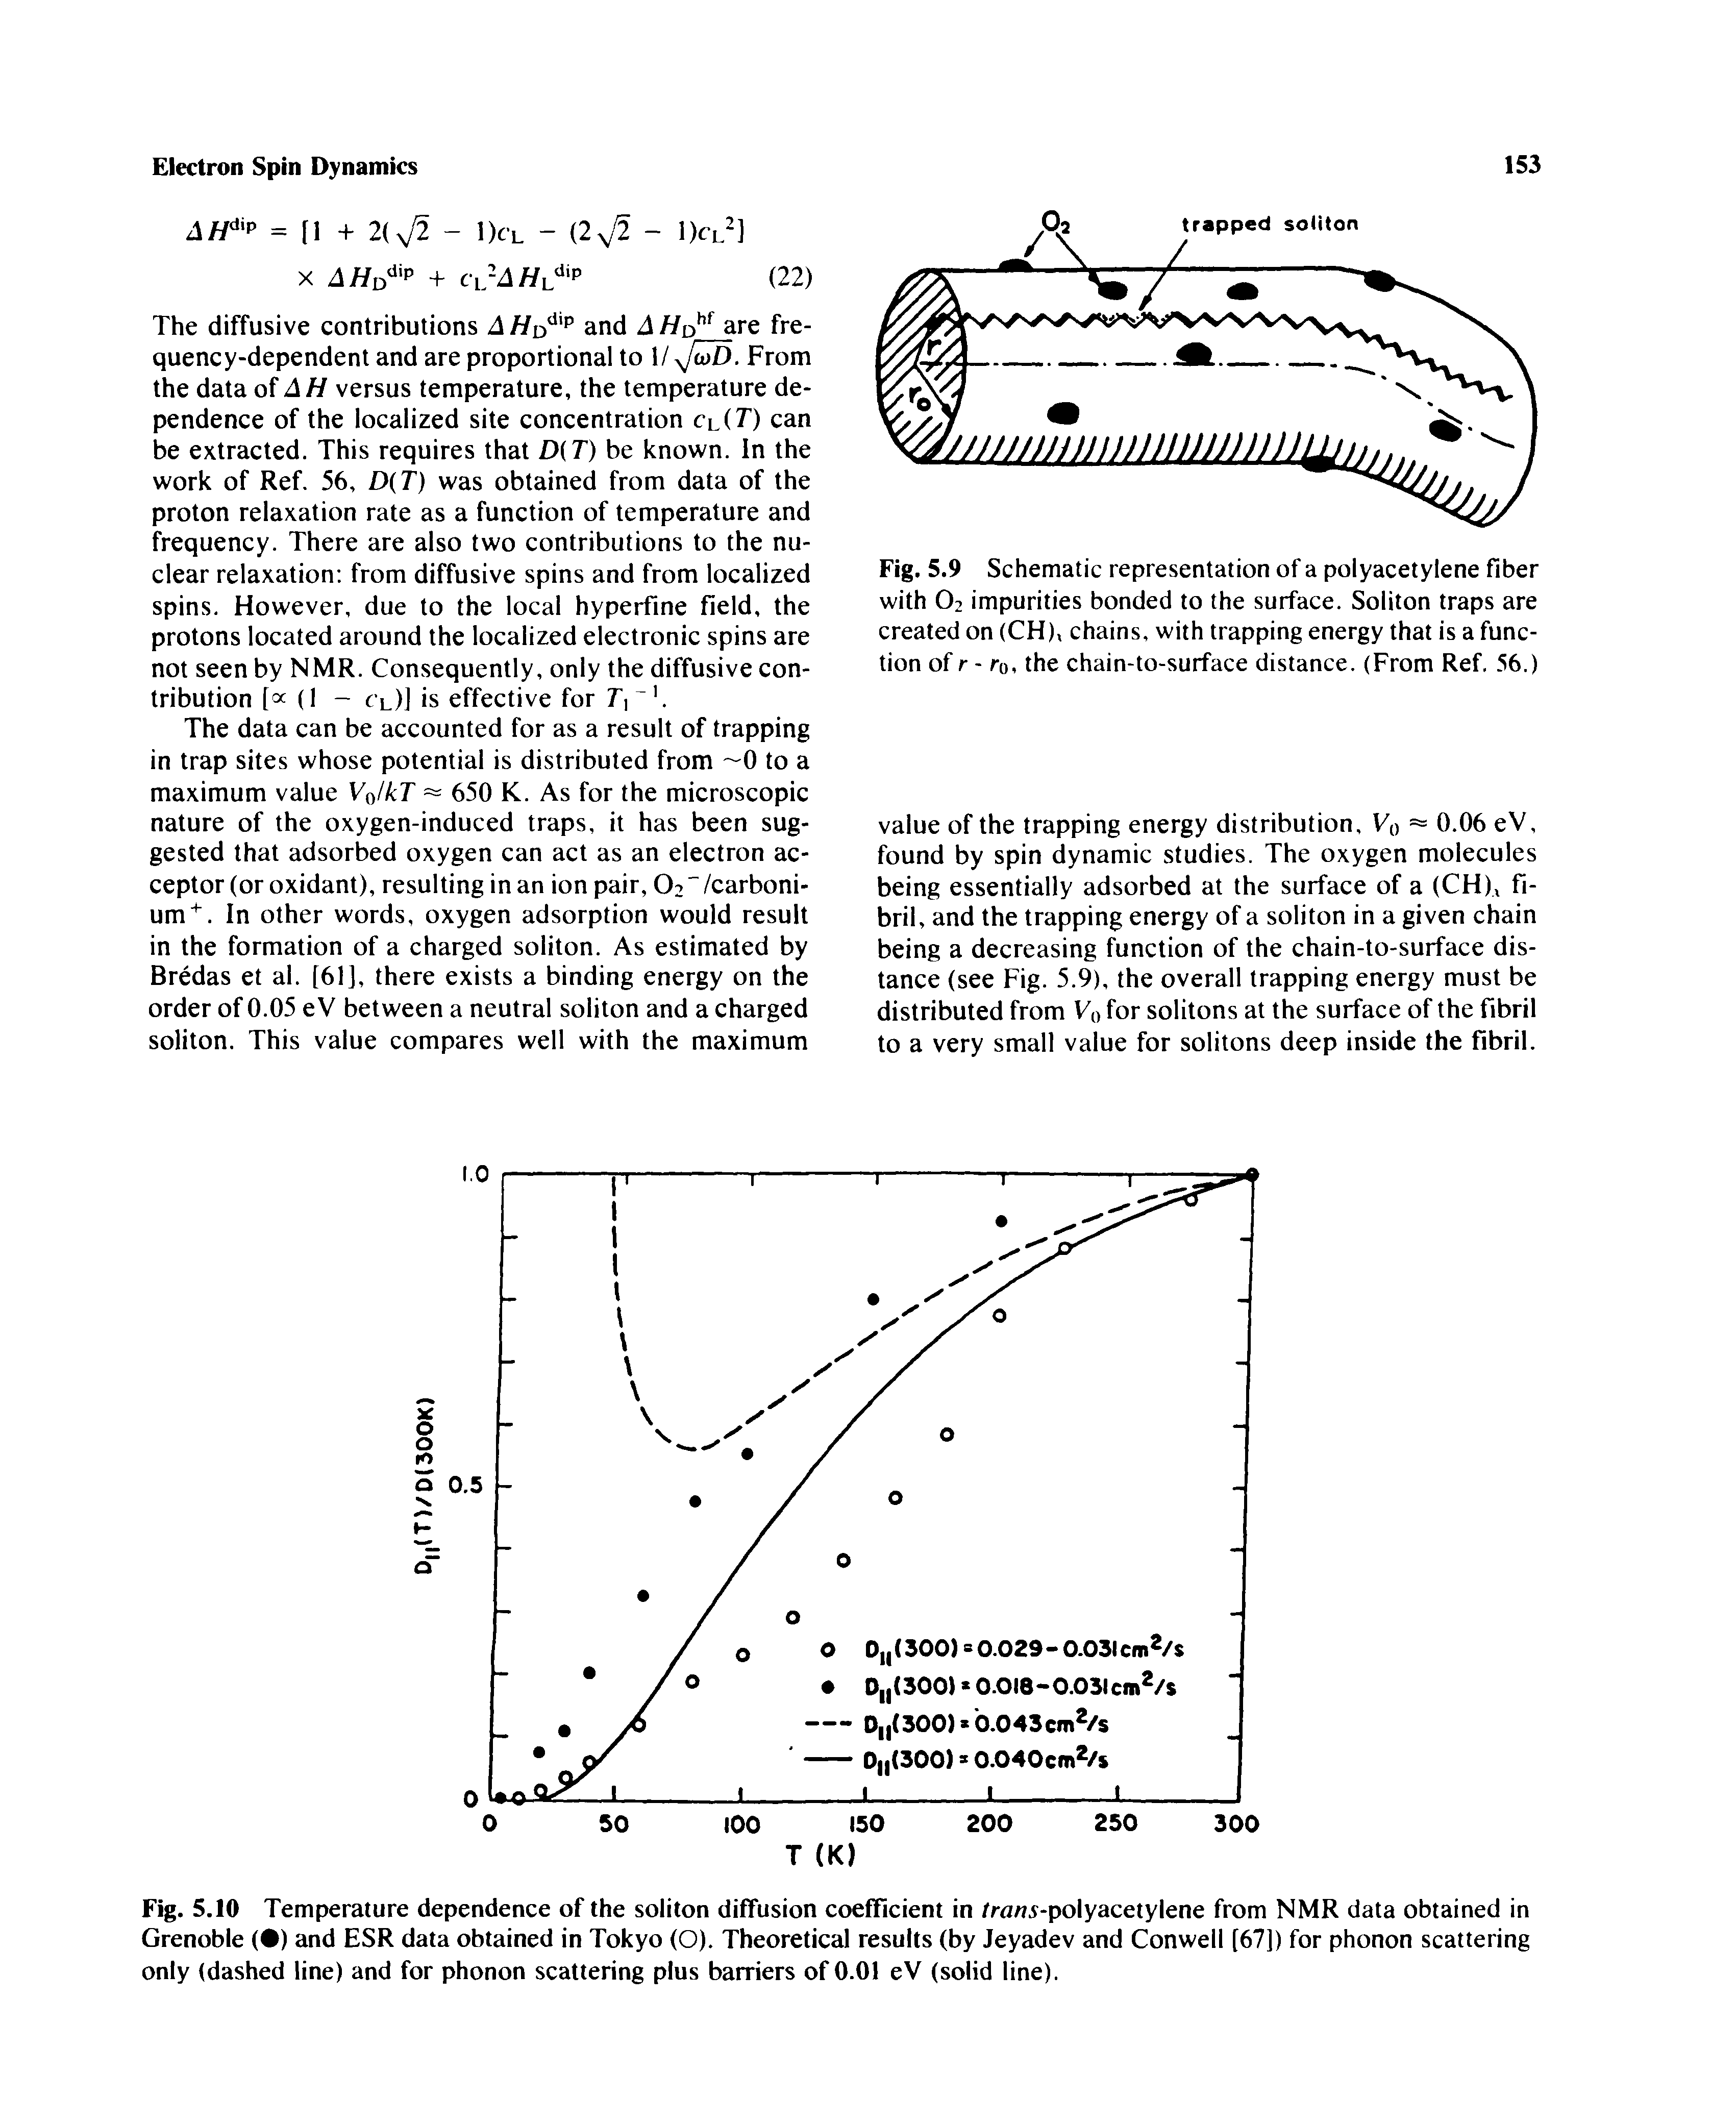 Fig. 5.9 Schematic representation of a polyacetylene fiber with O2 impurities bonded to the surface. Soliton traps are created on (CH), chains, with trapping energy that is a function of r - ro, the chain-to-surface distance. (From Ref. 56.)...